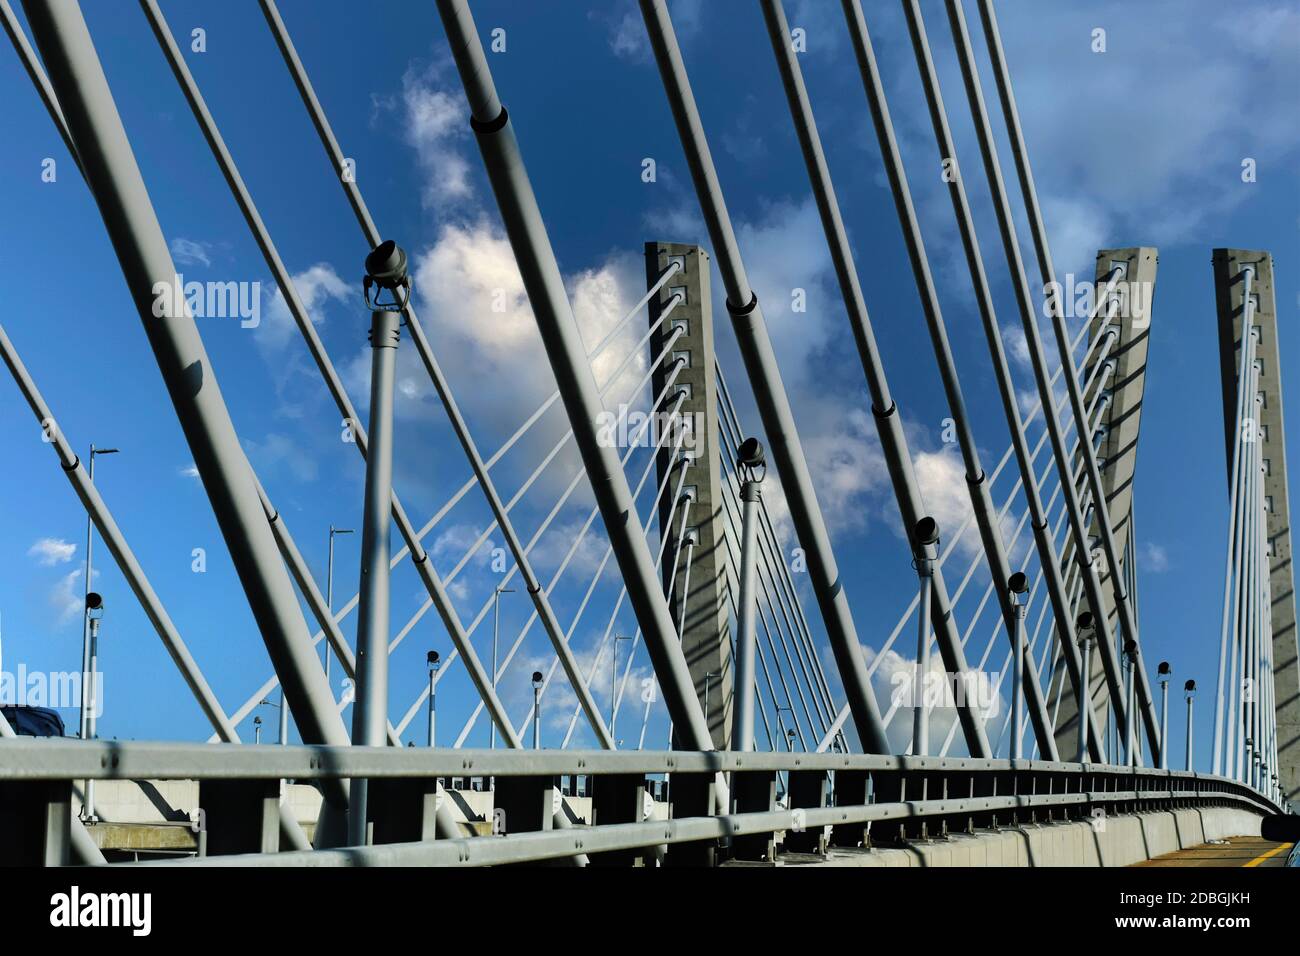 STEEL CURTAIN:VOLUME 1: The new Goethals bridge which opened in 2017 is architecturally superior in design and to its predecessor constructed in 1928. Stock Photo